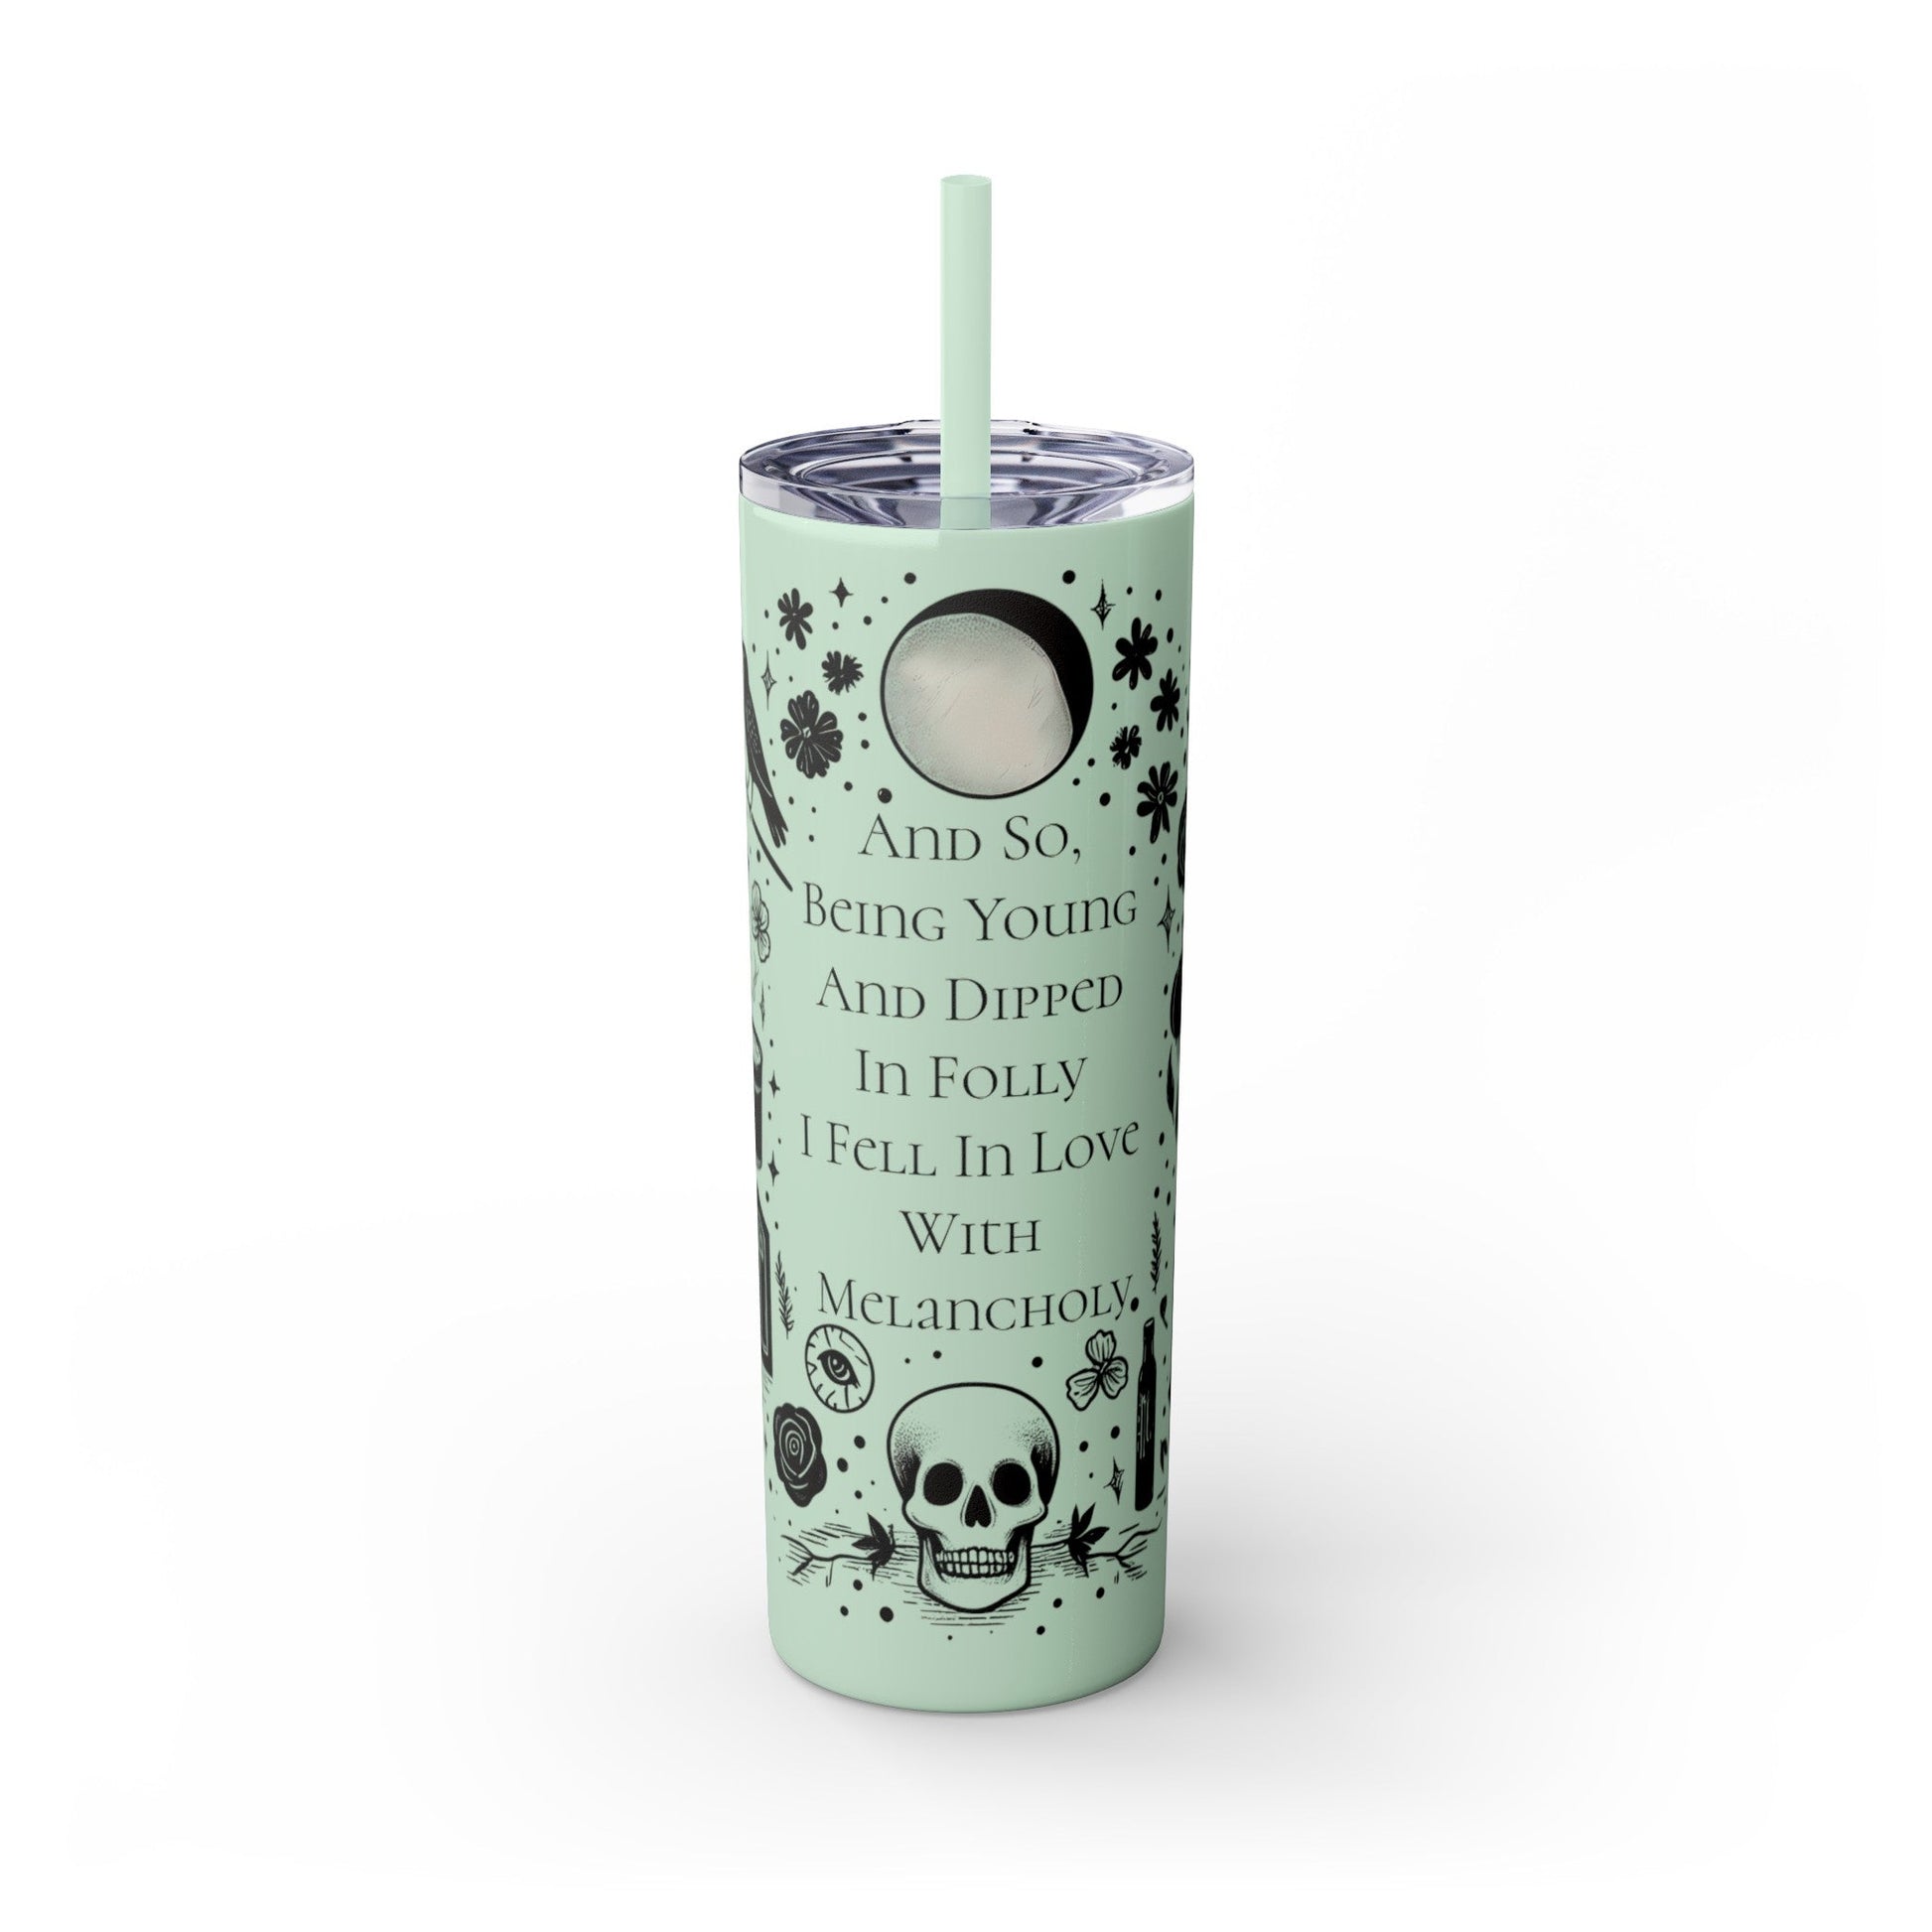 And So Being Young And Dipped In Folly I Fell In Love With Melancholy Skinny Tumbler with StrawMugVTZdesignsGlossySeafoam20oz20 ozBottles & Tumblerscup